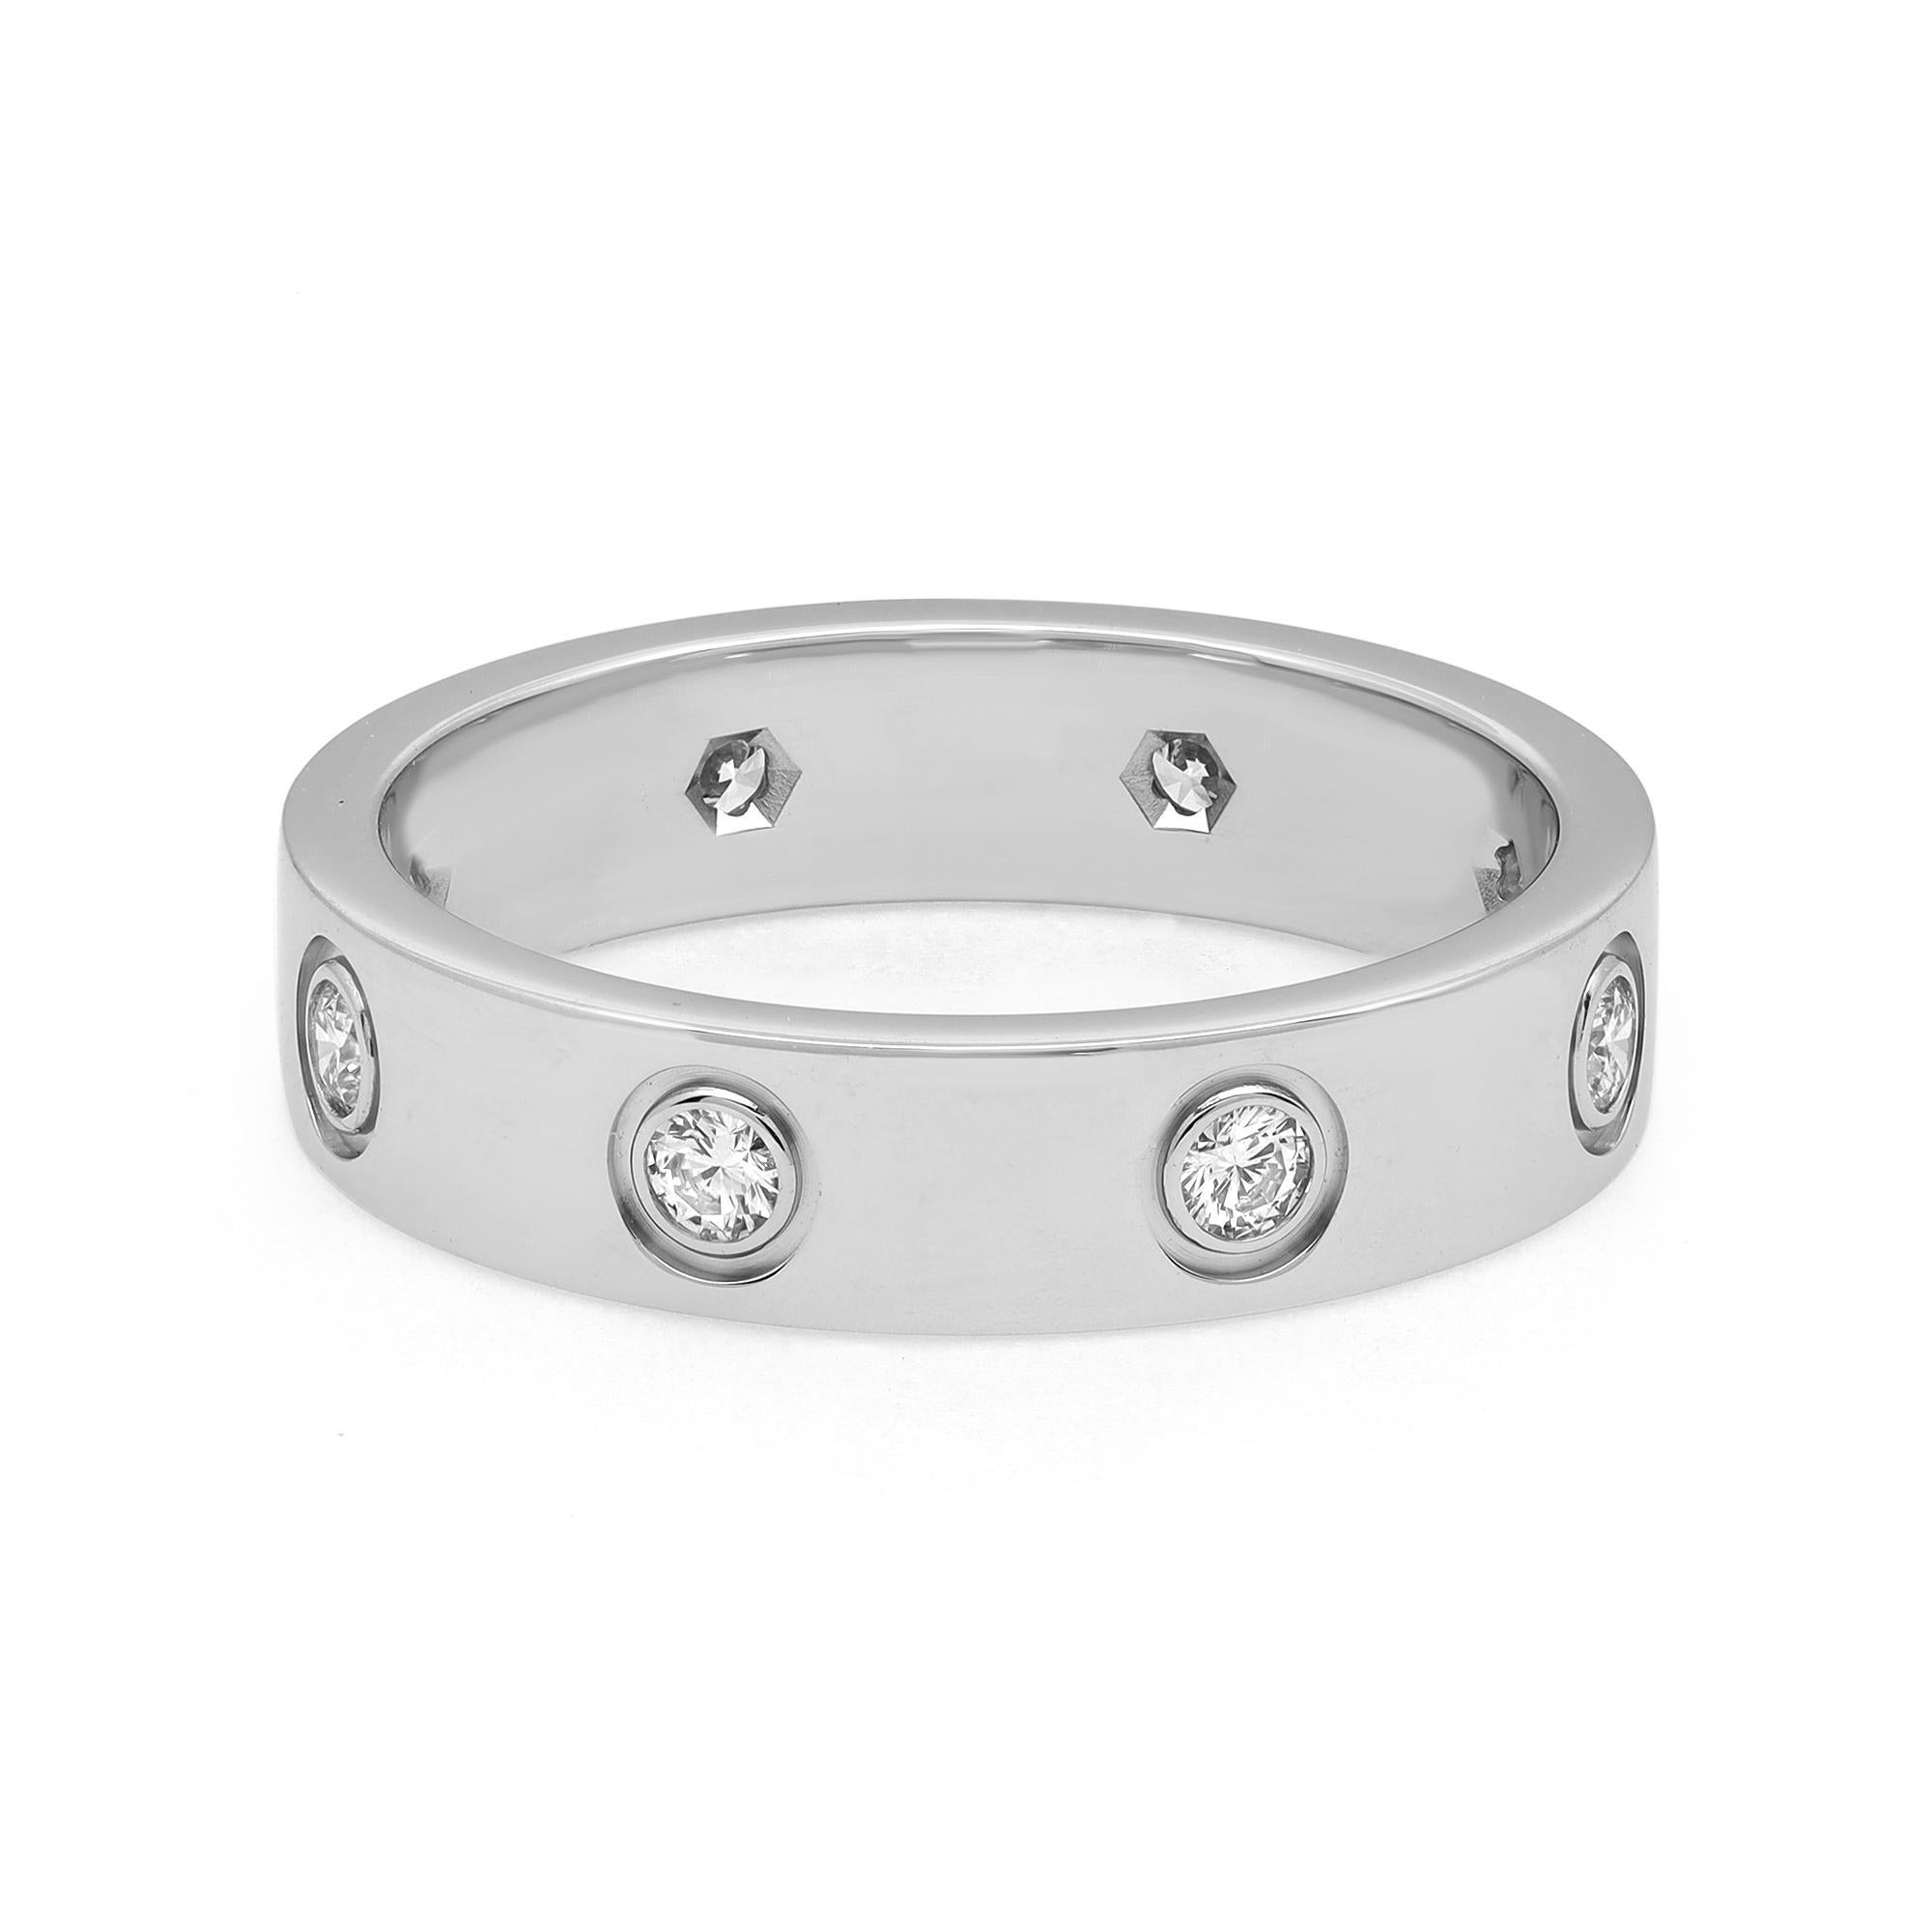 Cartier Love wedding band ring, crafted in 18k white gold. Set with 8 brilliant round cut diamonds totaling 0.19 carat. Width: 4 mm. Ring size 48 US 4.5. Excellent pre-owned condition. Comes with an original box and certificate.
